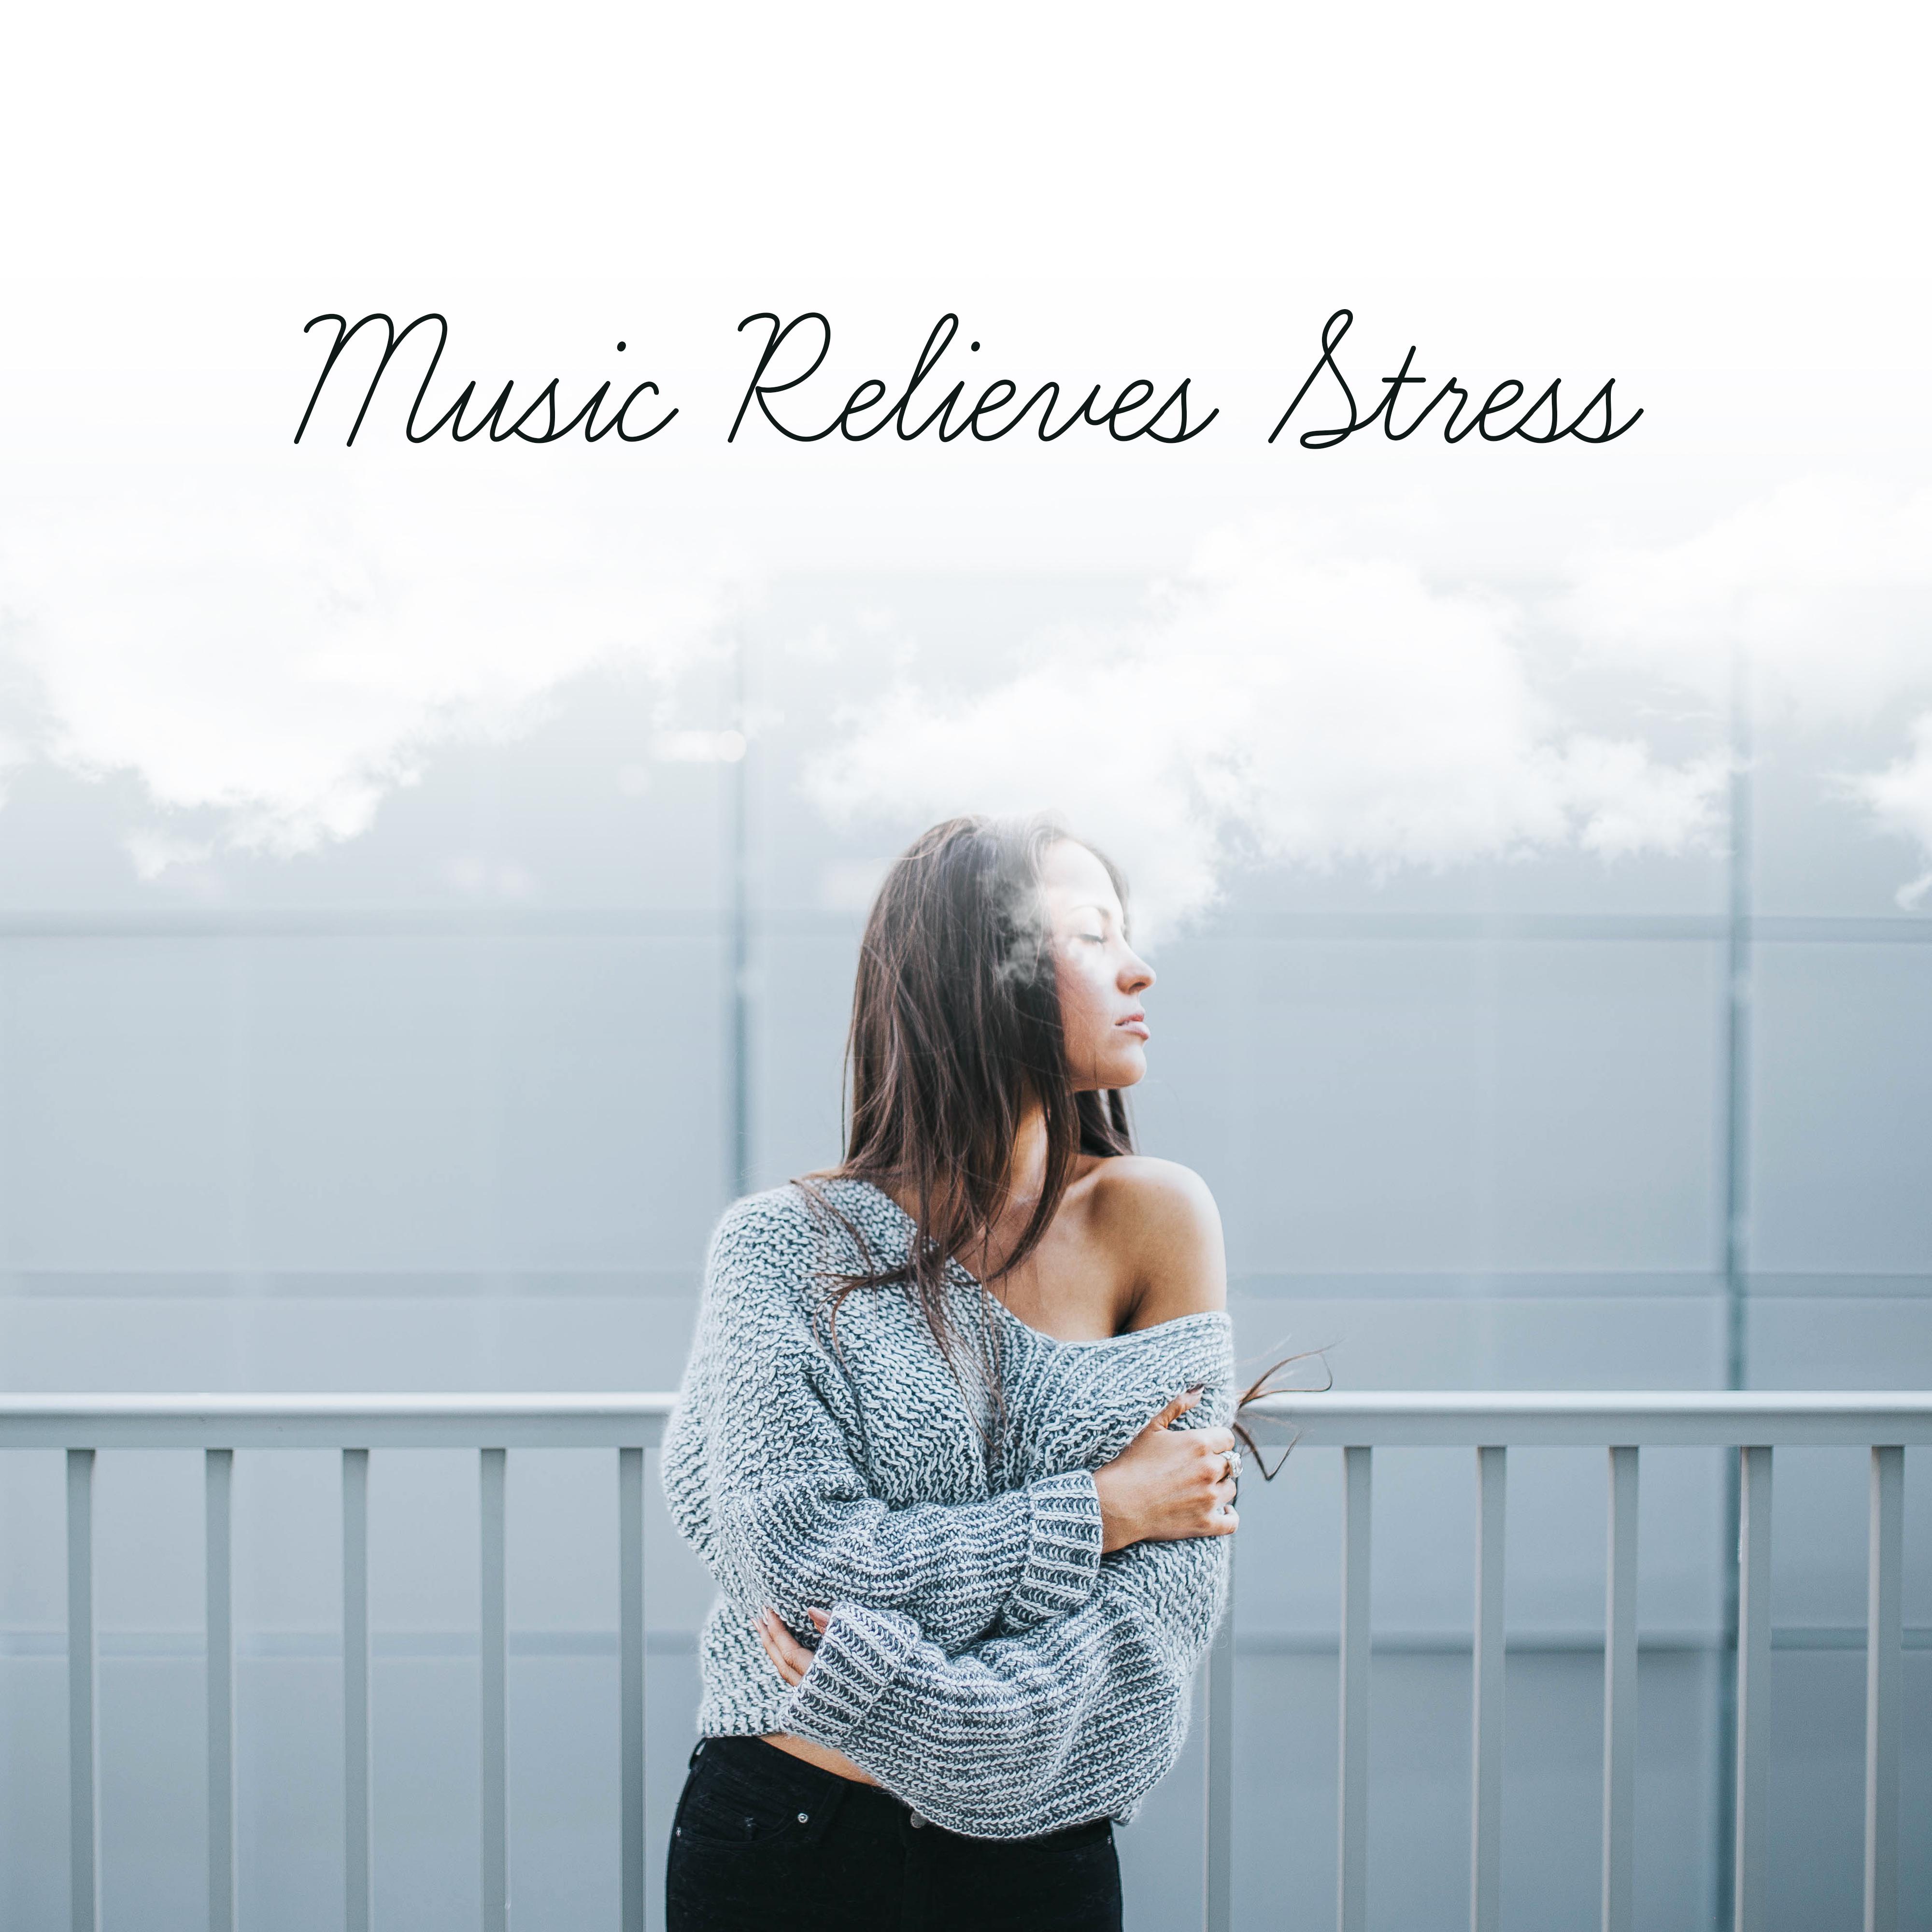 Music Relieves Stress – Pure Relaxation, Peaceful Mind, Zen Music to Rest, Inner Tranquil, Healing Sounds, Anti Stress Music, New Age